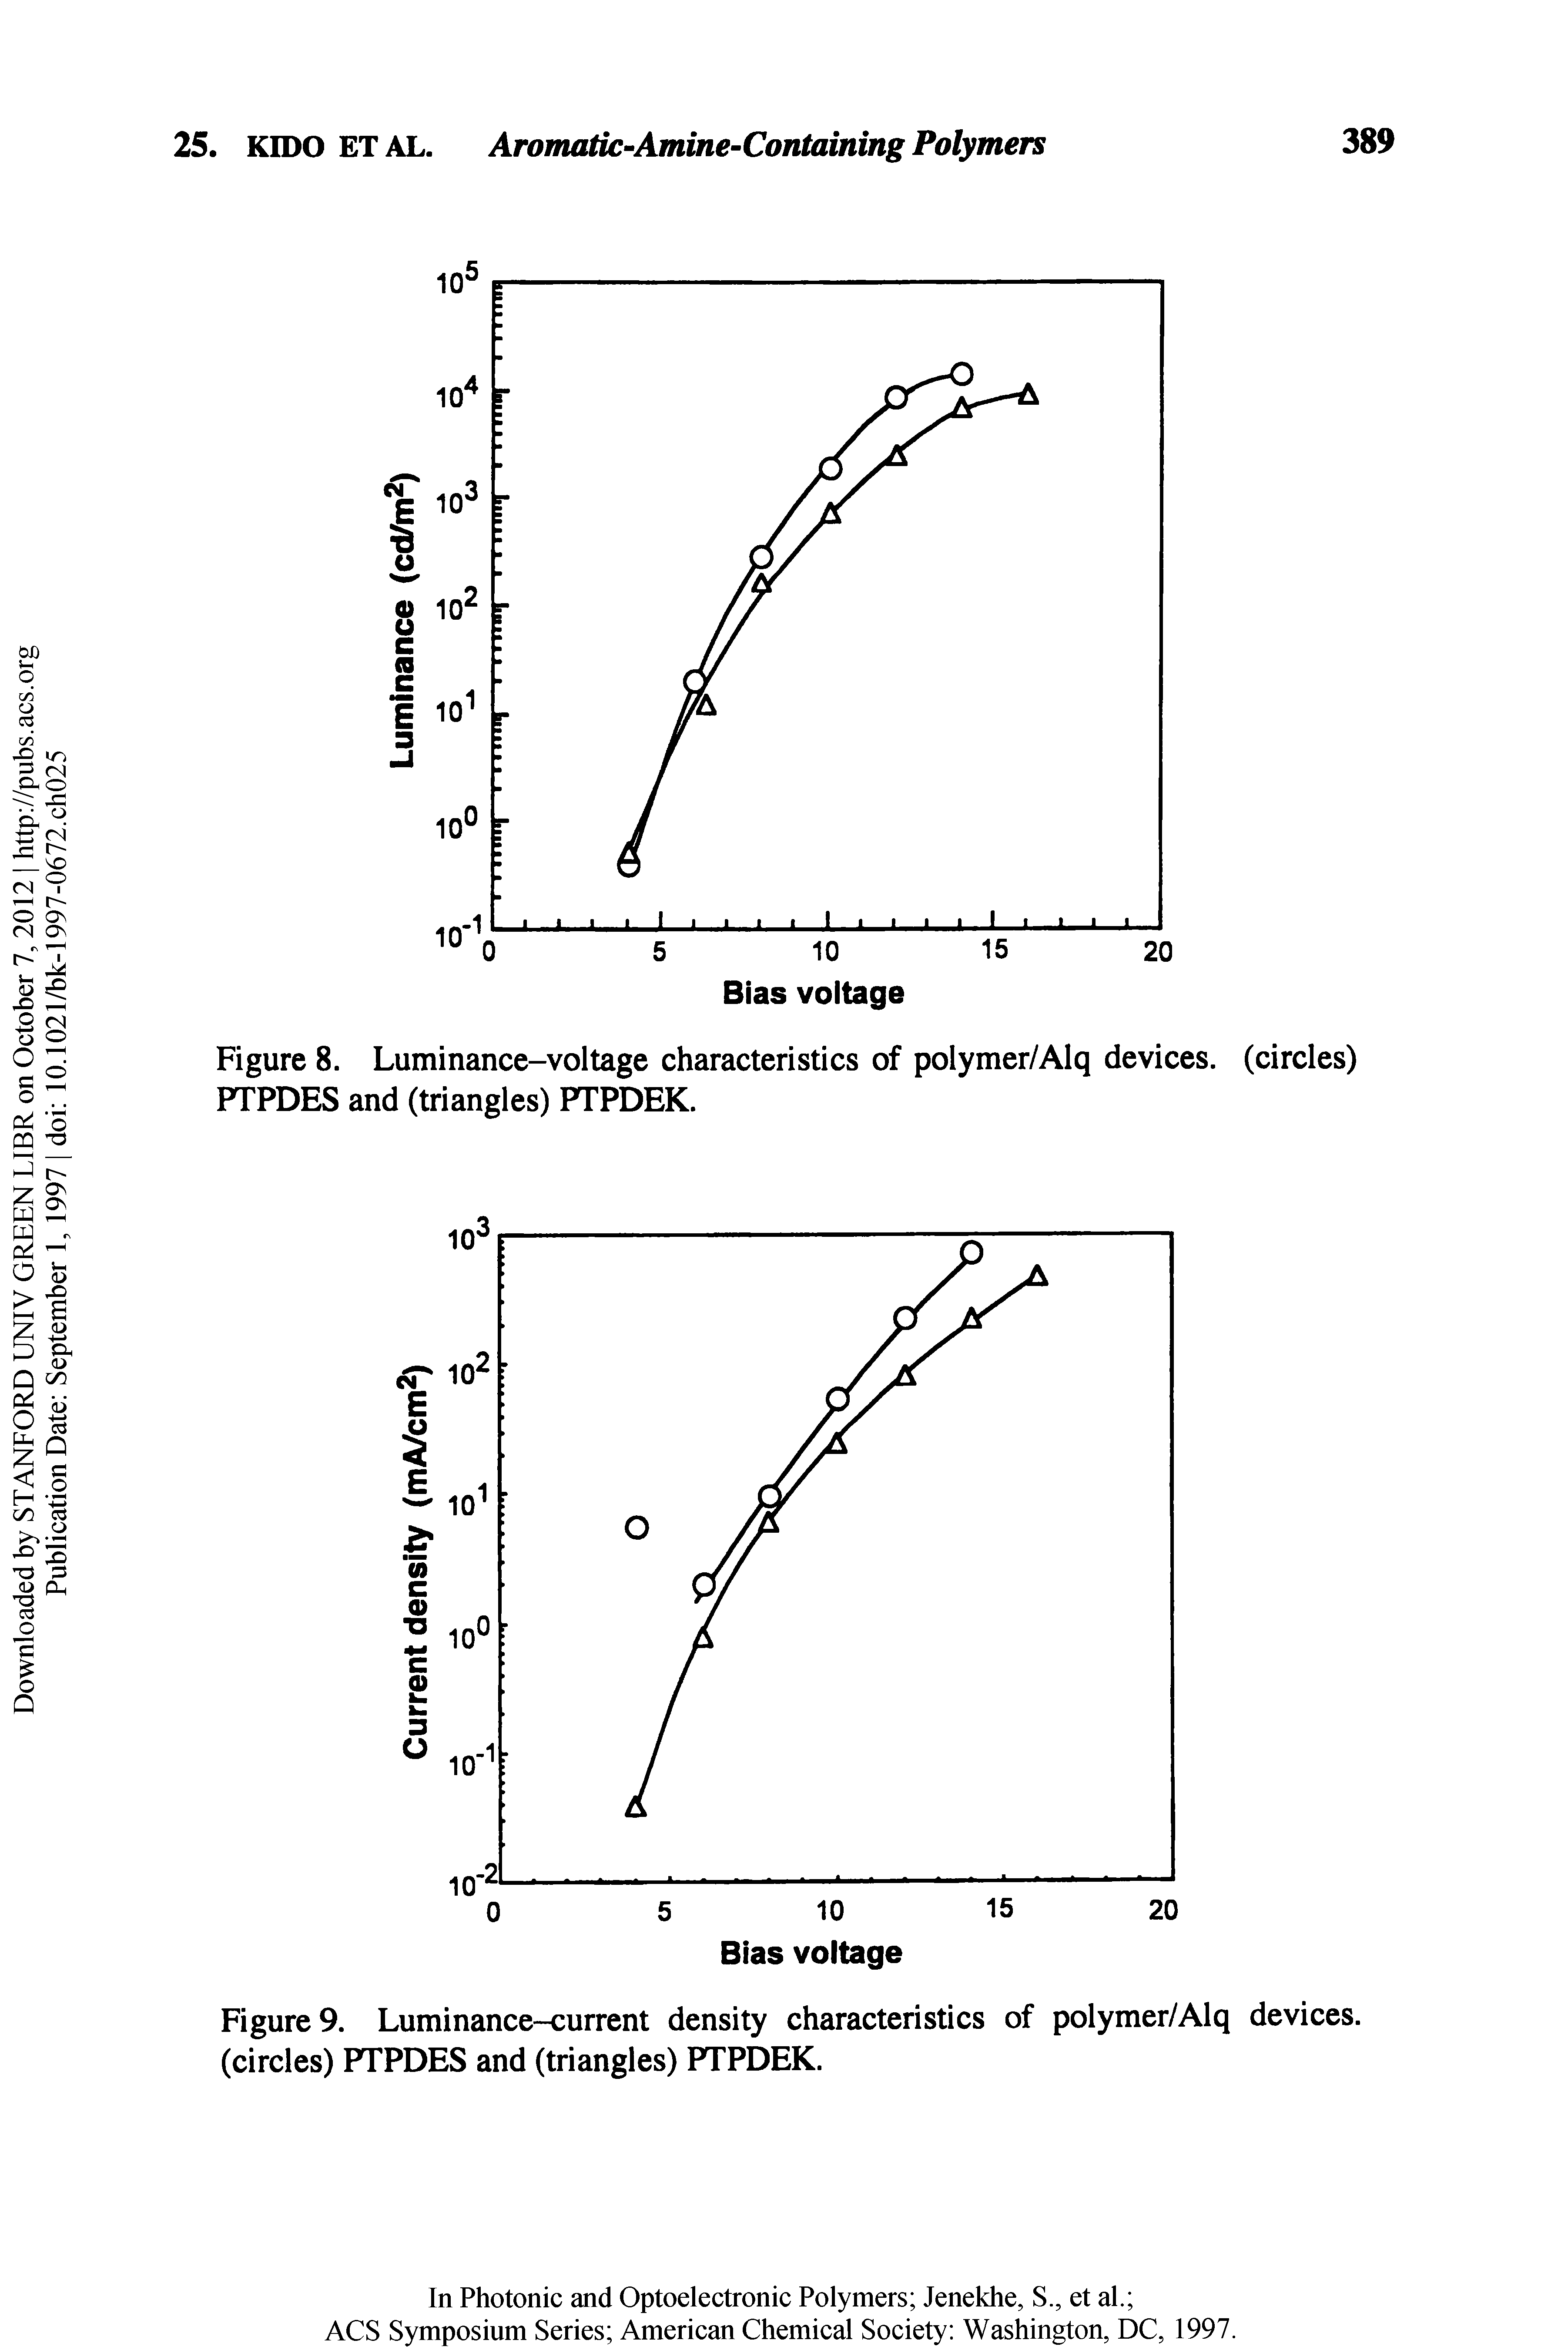 Figure 8. Luminance-voltage characteristics of polymer/Alq devices, (circles) PTPDES and (triangles) PTPDEK.